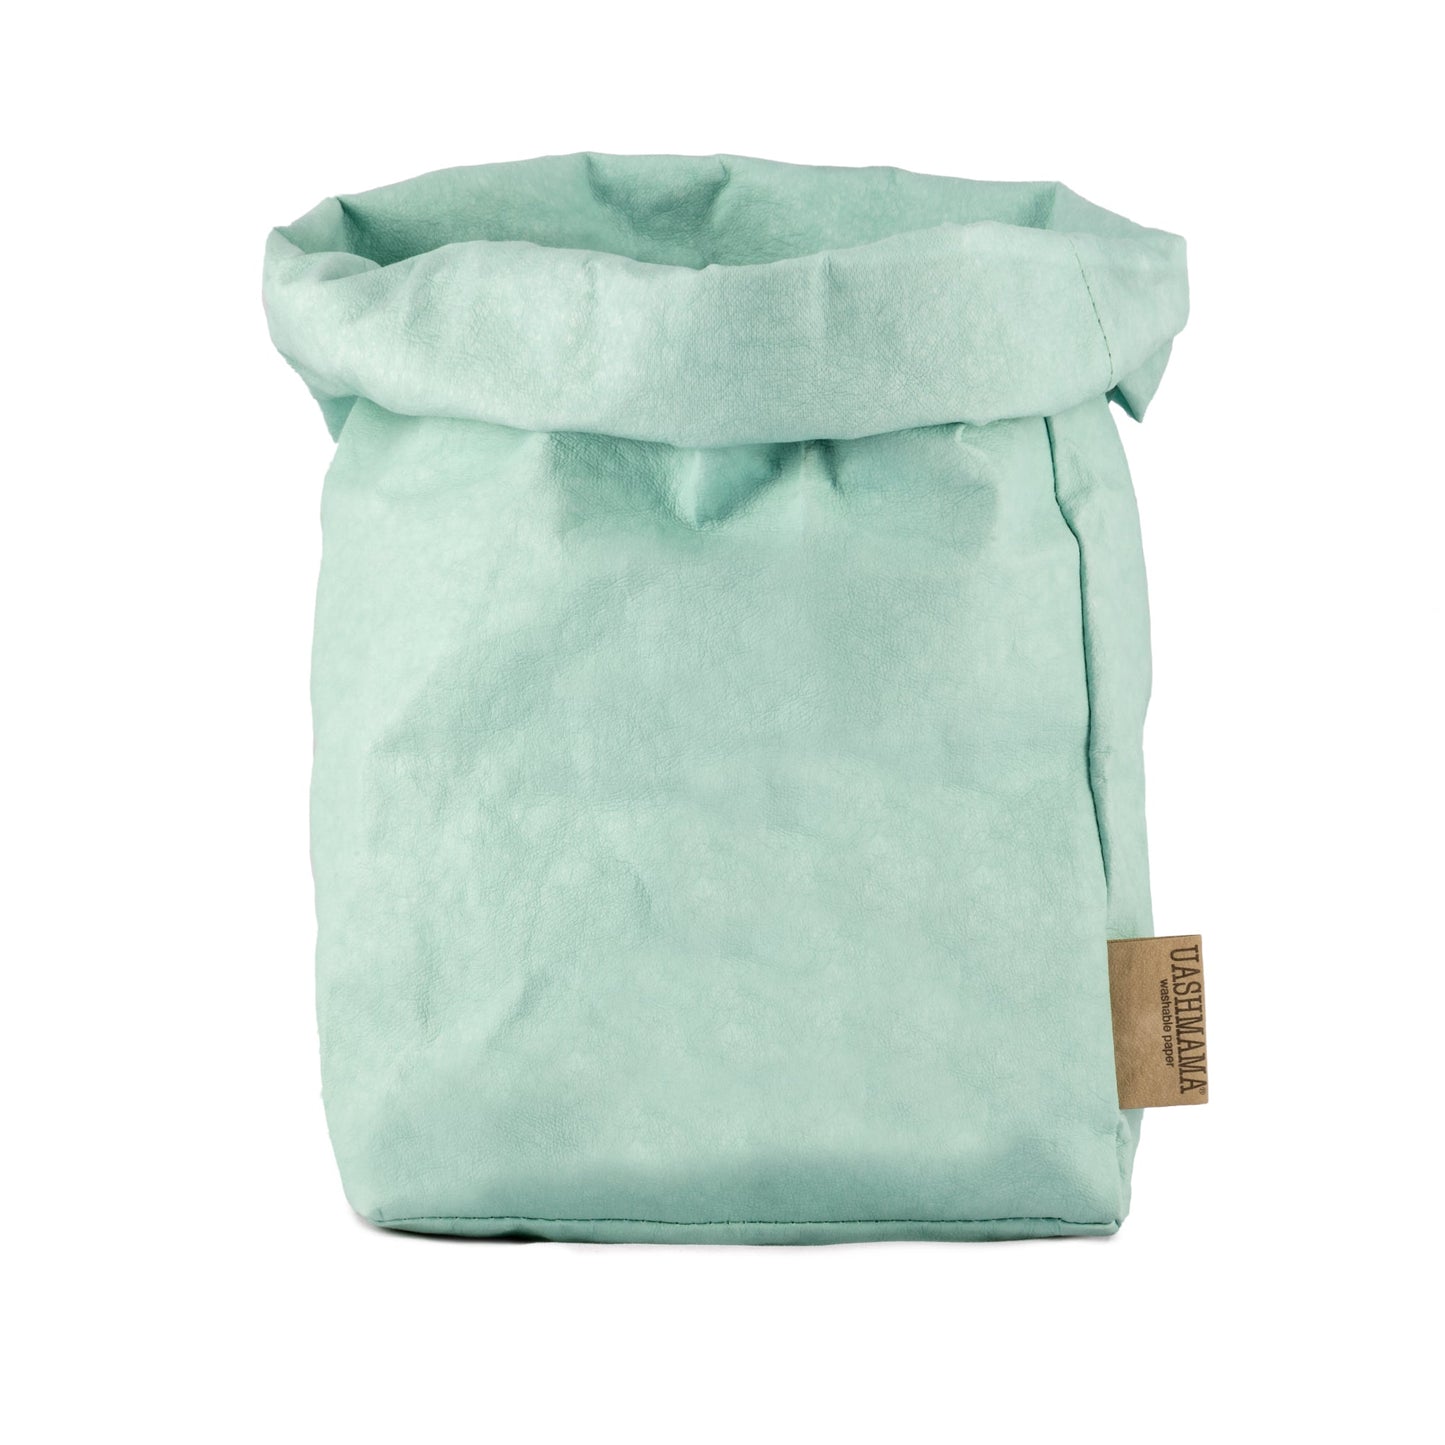 A washable paper bag is shown. The bag is rolled down at the top and features a UASHMAMA logo label on the bottom left corner. The bag pictured is the large plus size in pale turquoise.